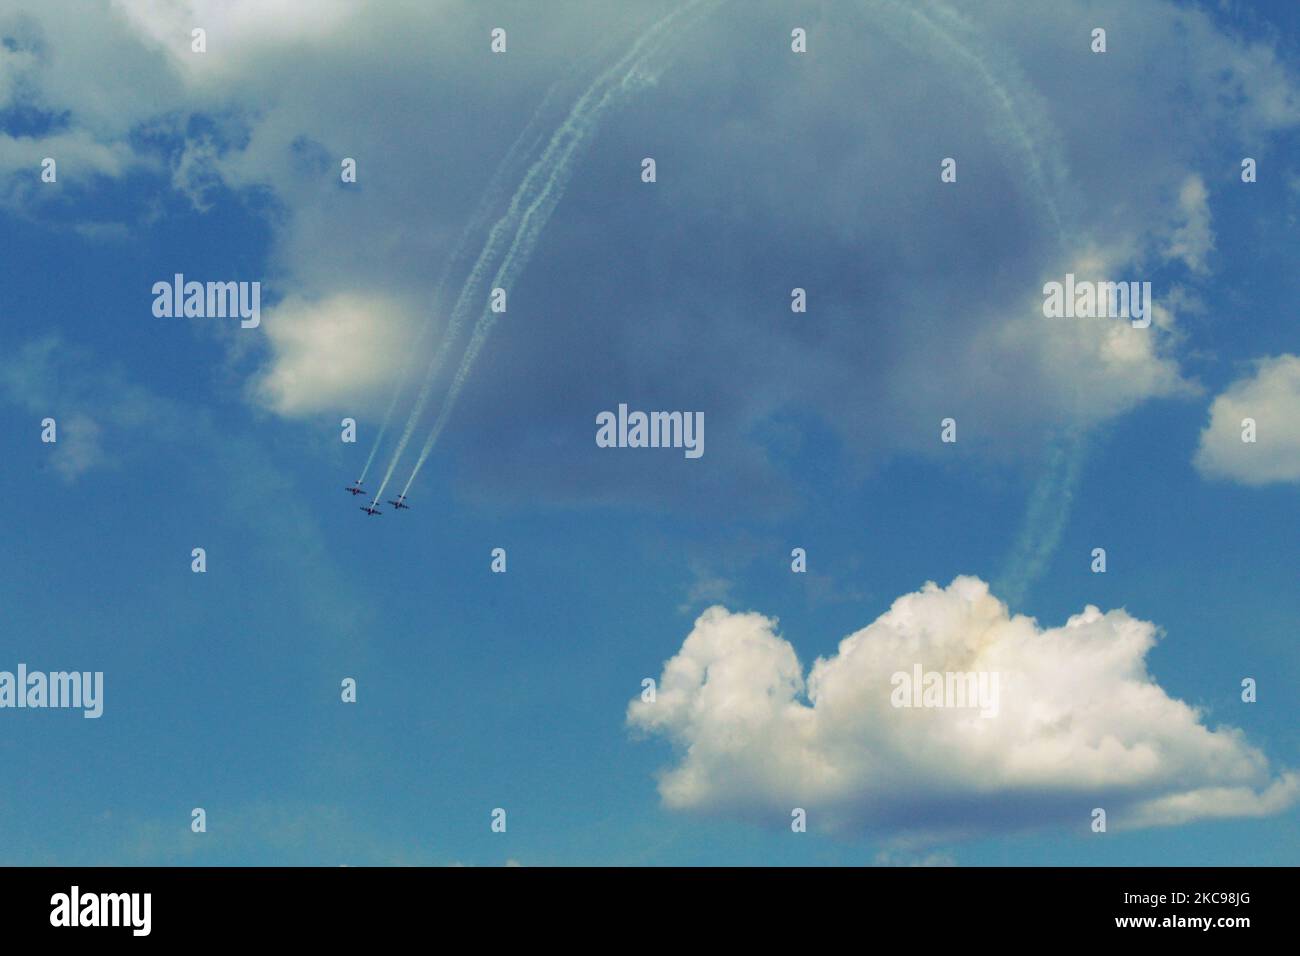 A beautiful cloudy blue sky with three airplanes during the air show with white smoke trails Stock Photo